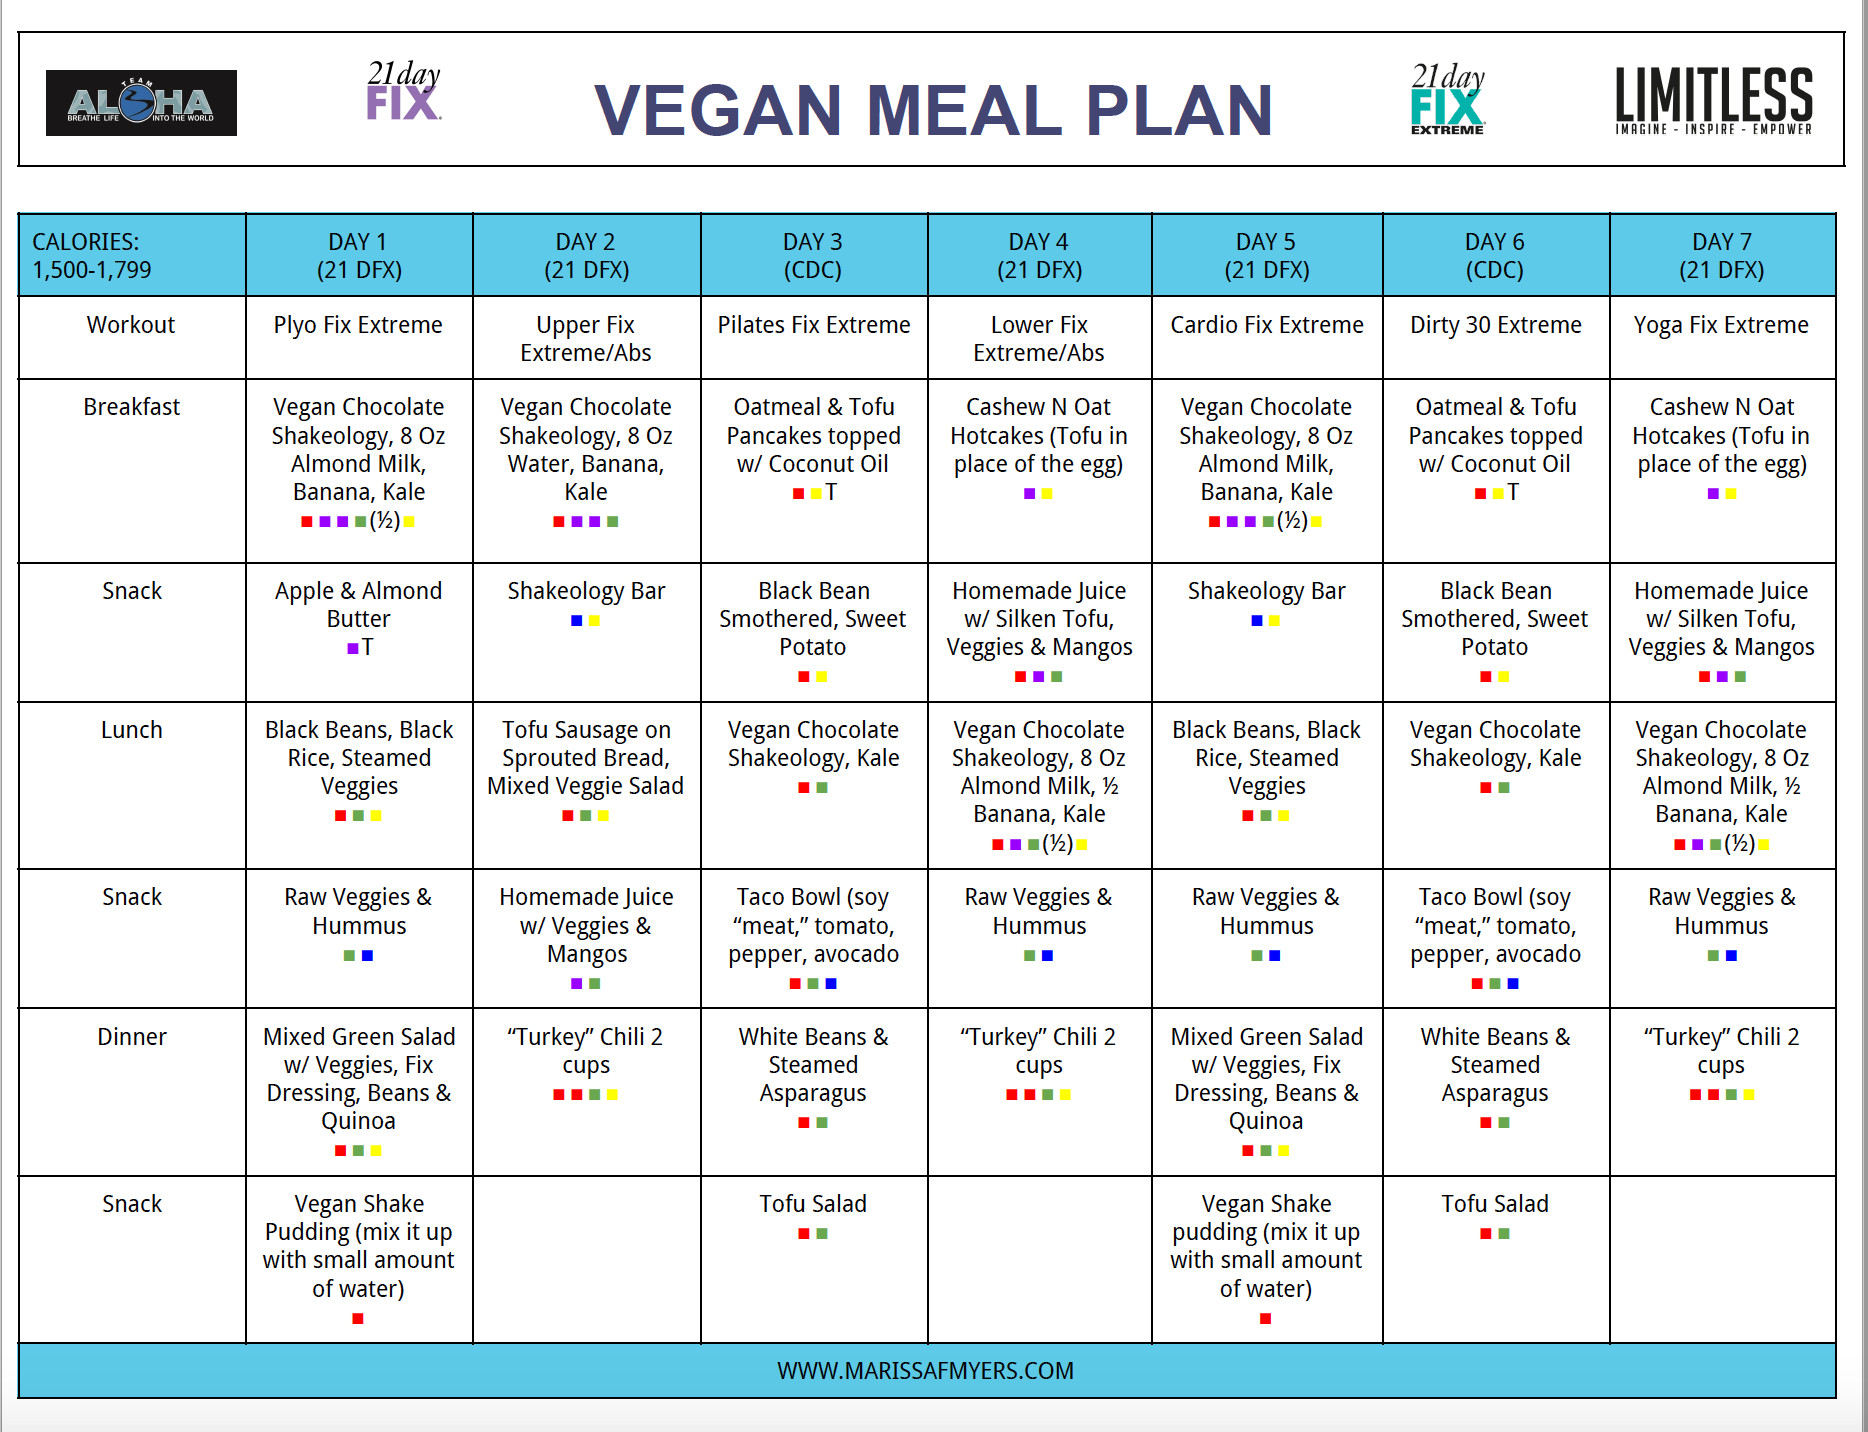 Vegan Diet Plan 21 Days
 Get Prepped For The 21 Day Fix or 21 Day Fix EXTREME